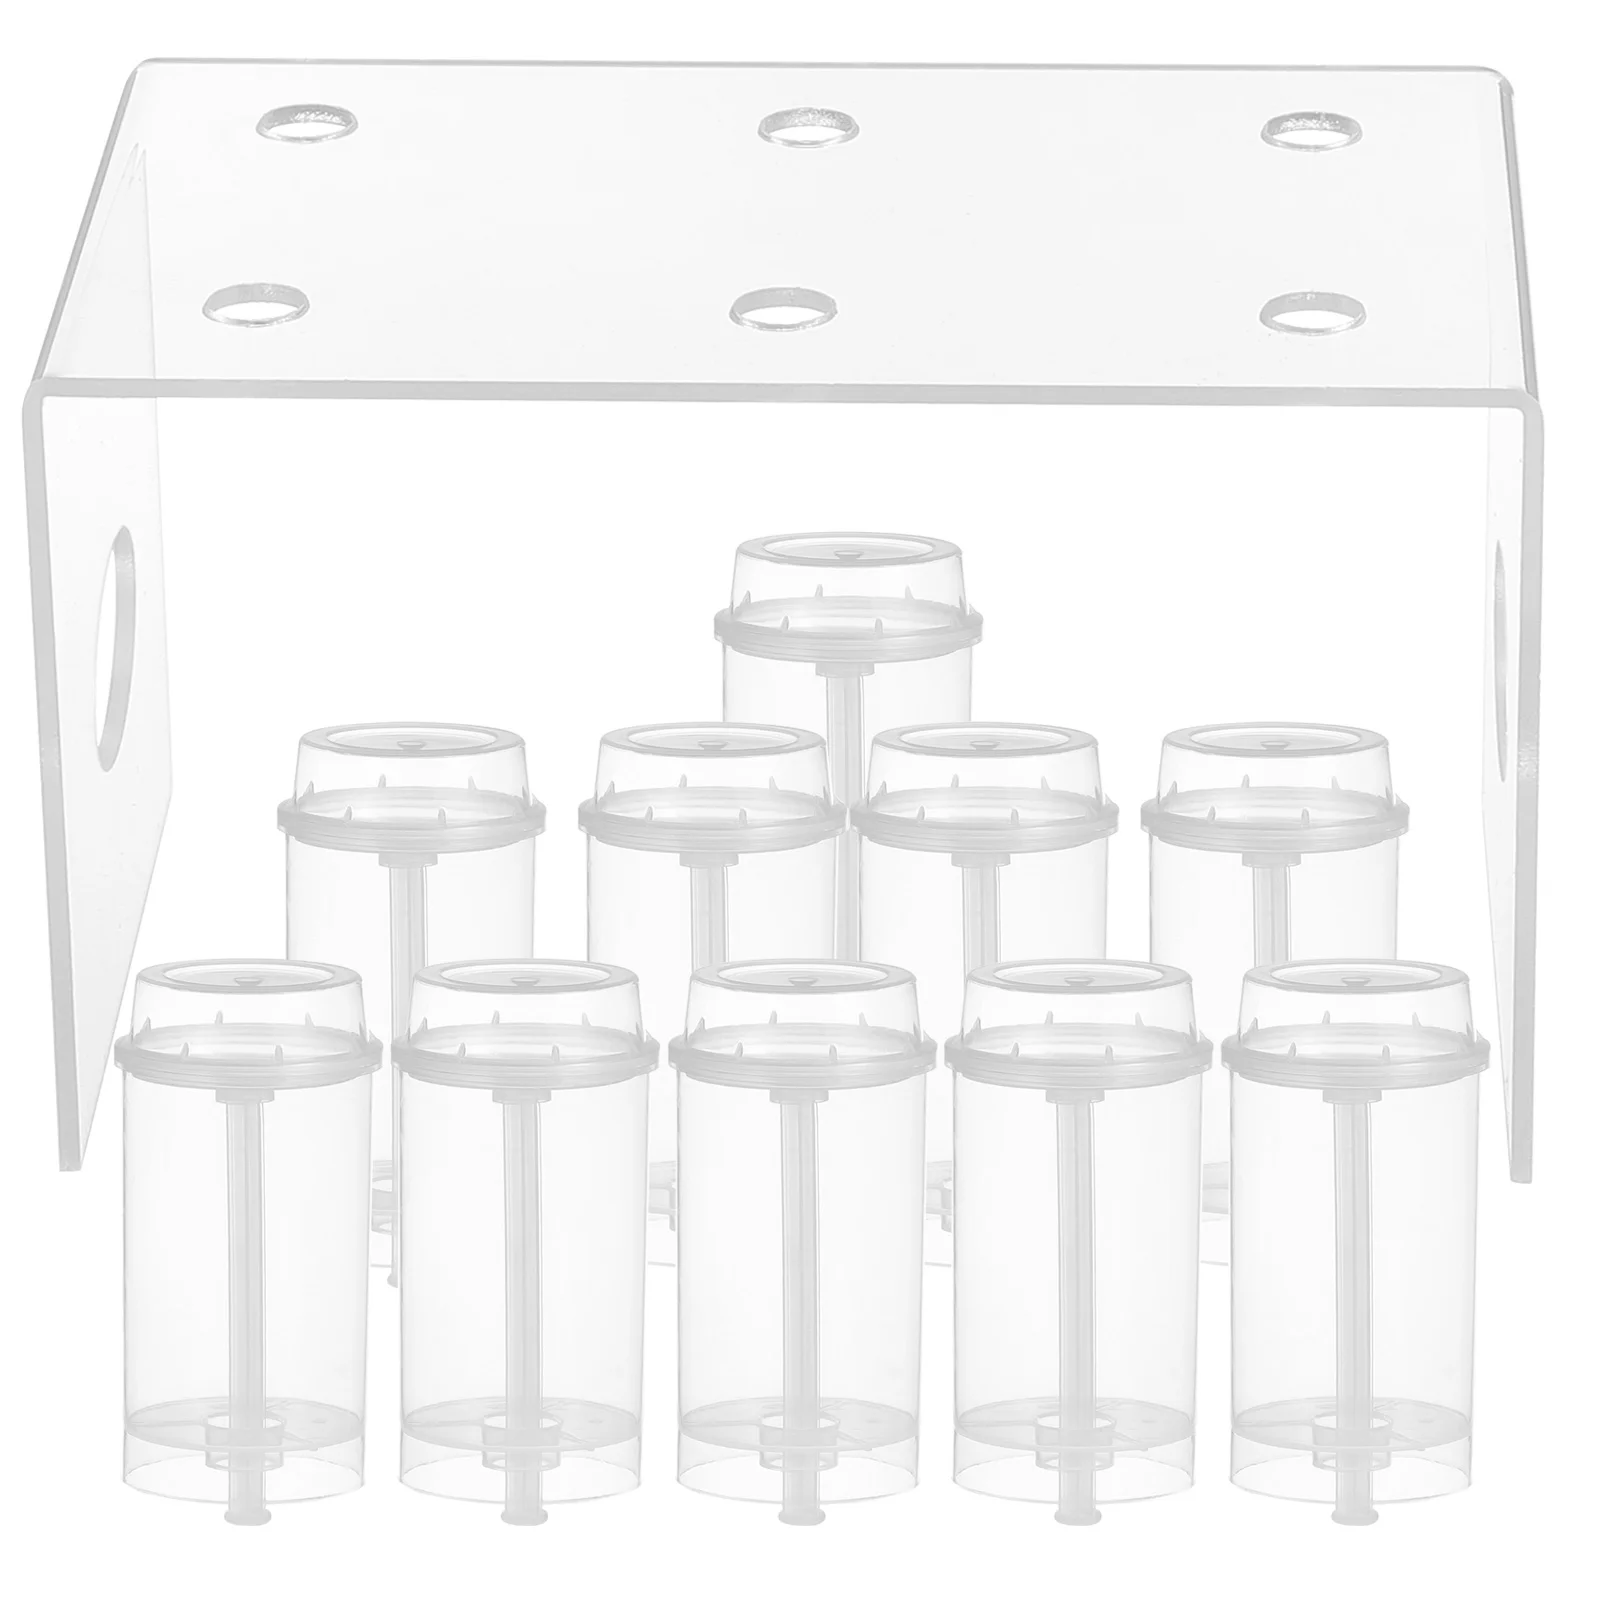 

10 Pcs Push Cake Shooter Baking Supplies Cups Cupcake Holder Lid Stand Pops Containers Lids Rack Clear Cylinder Plastic Dessert